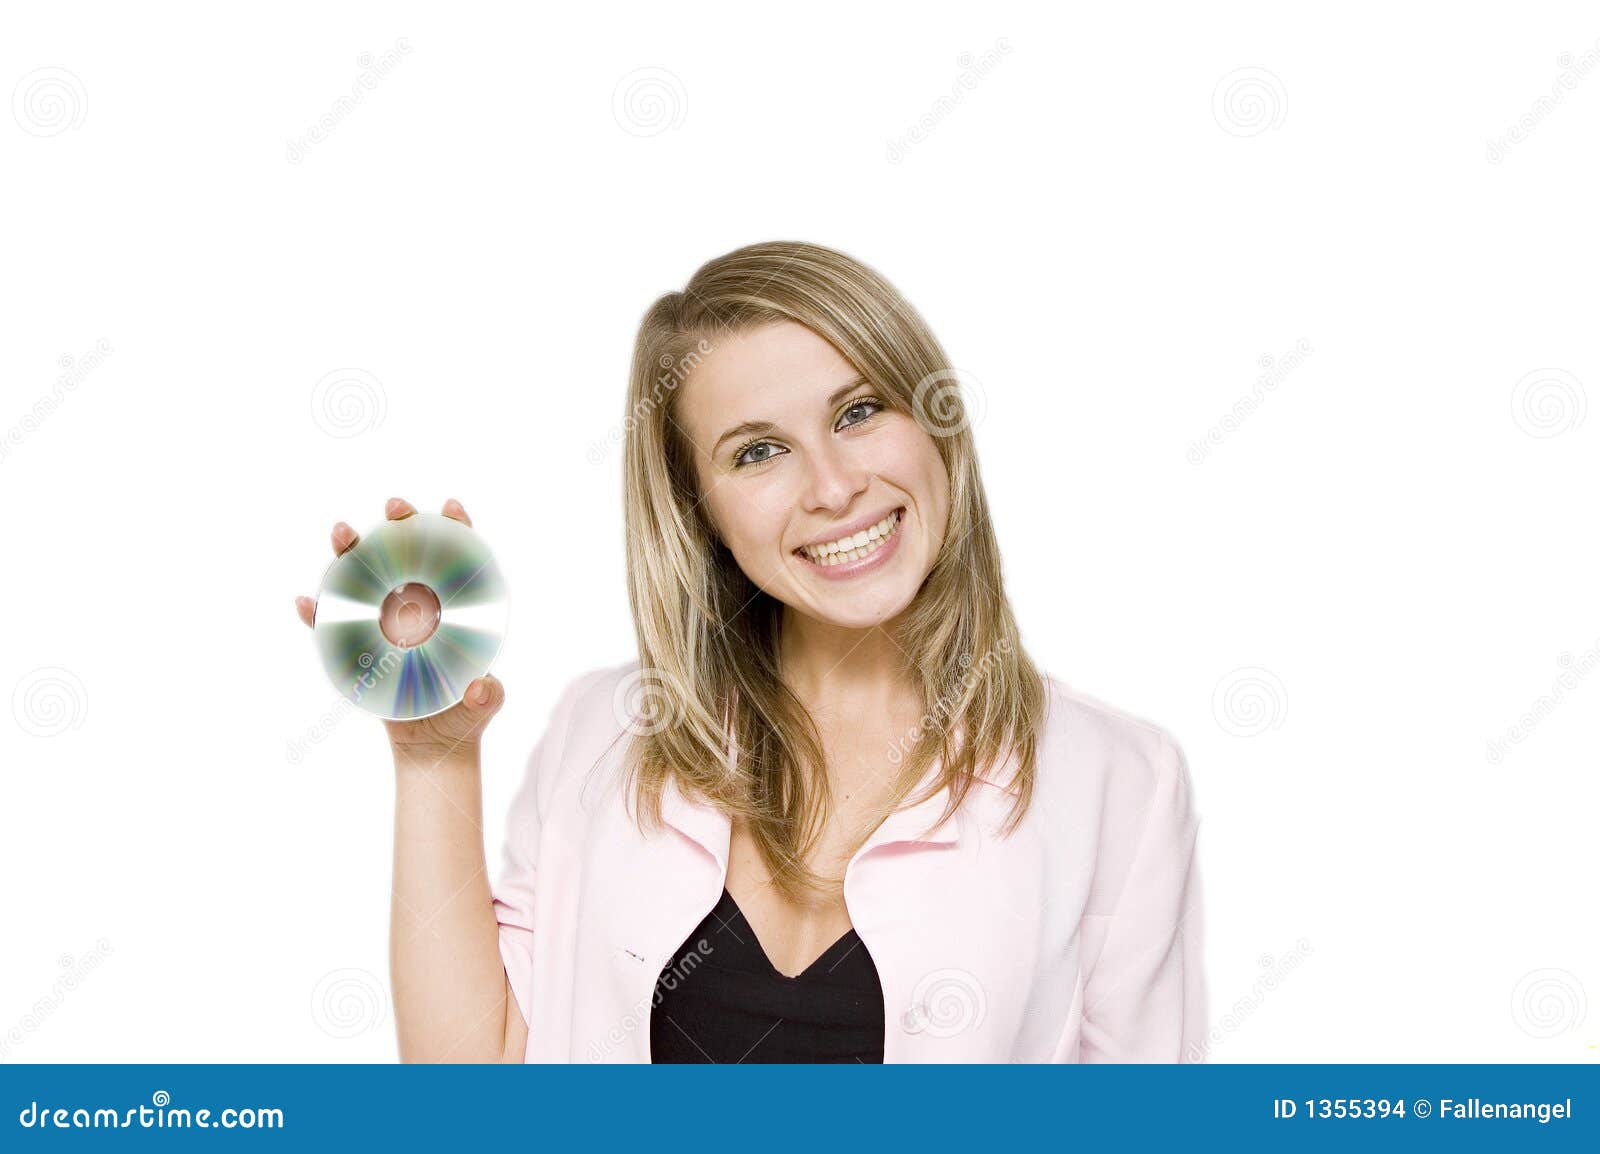 My dat stock photo. Image of data, compact, advertising - 1355394